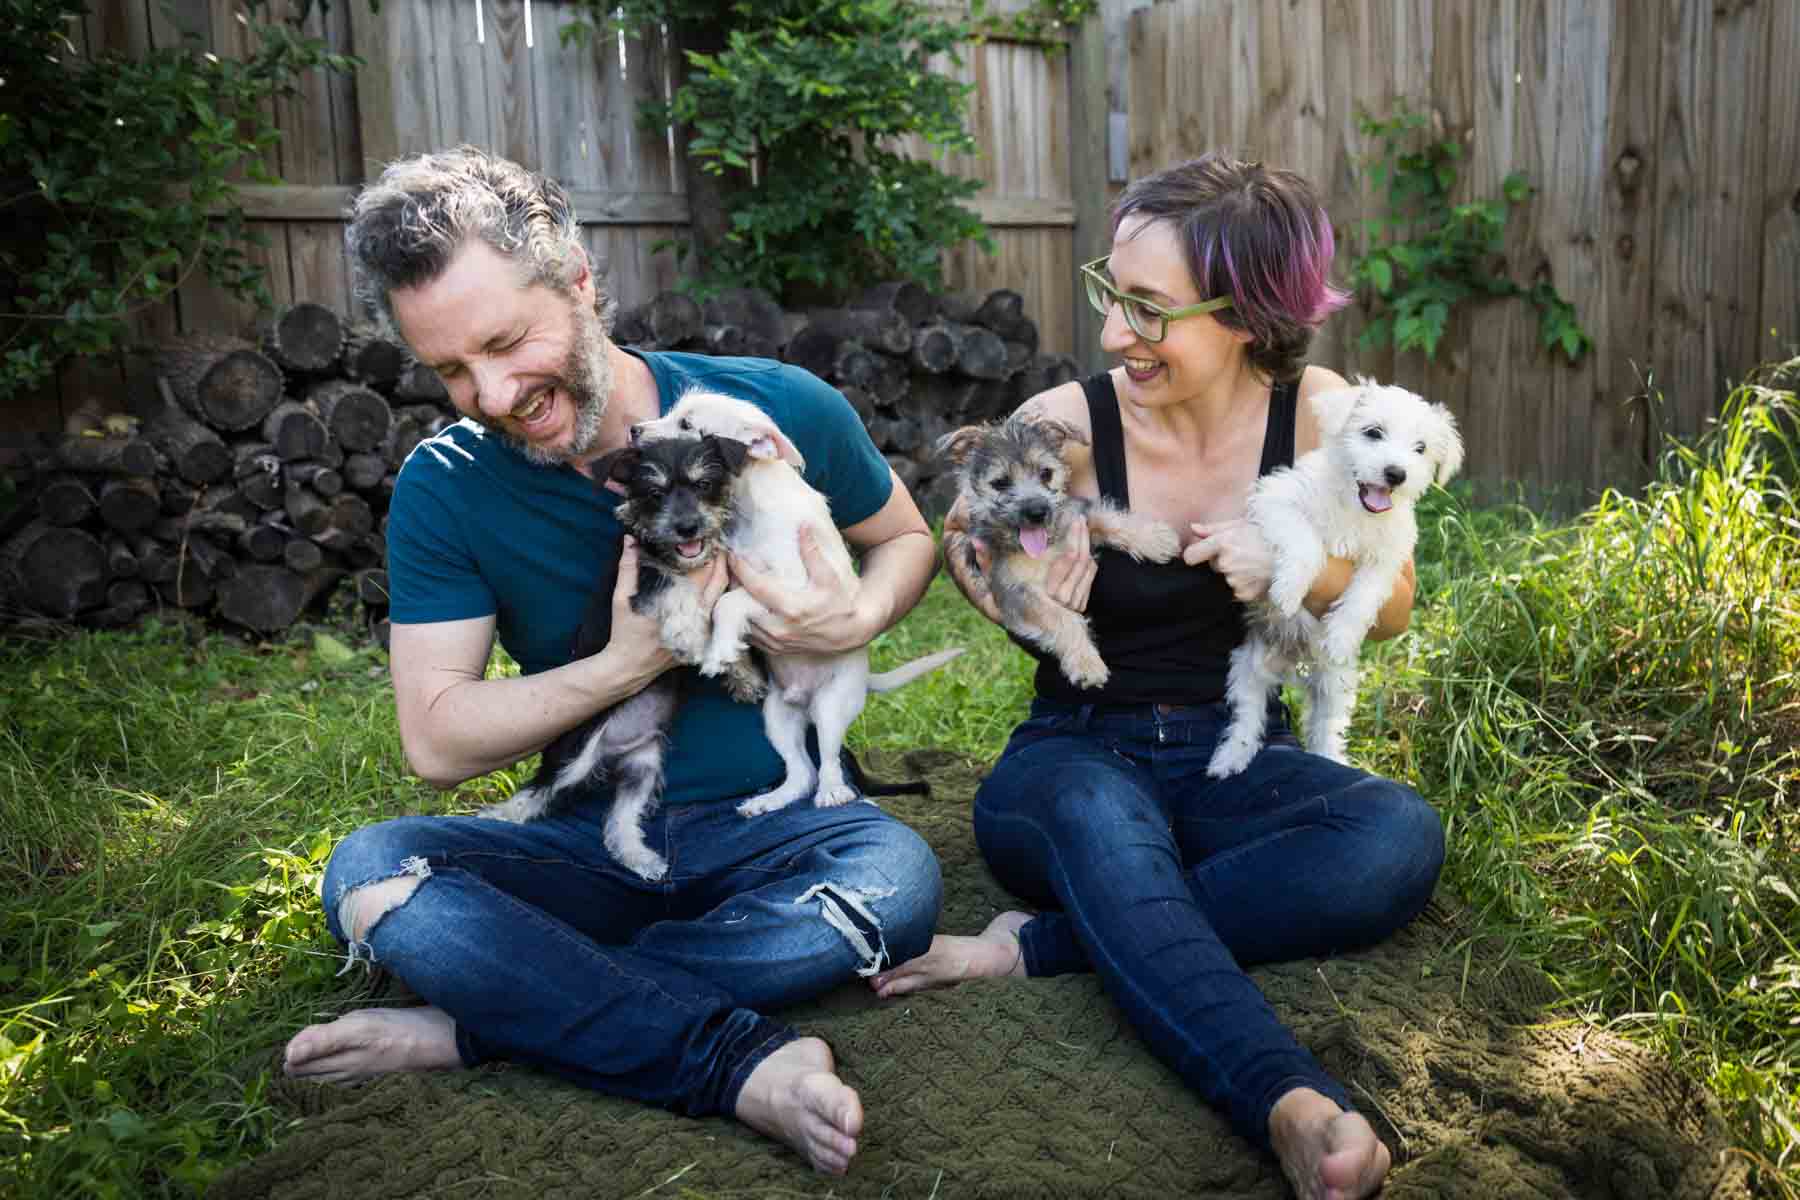 Man and woman sitting cross-legged on ground holding puppies for an article on pet photo tips